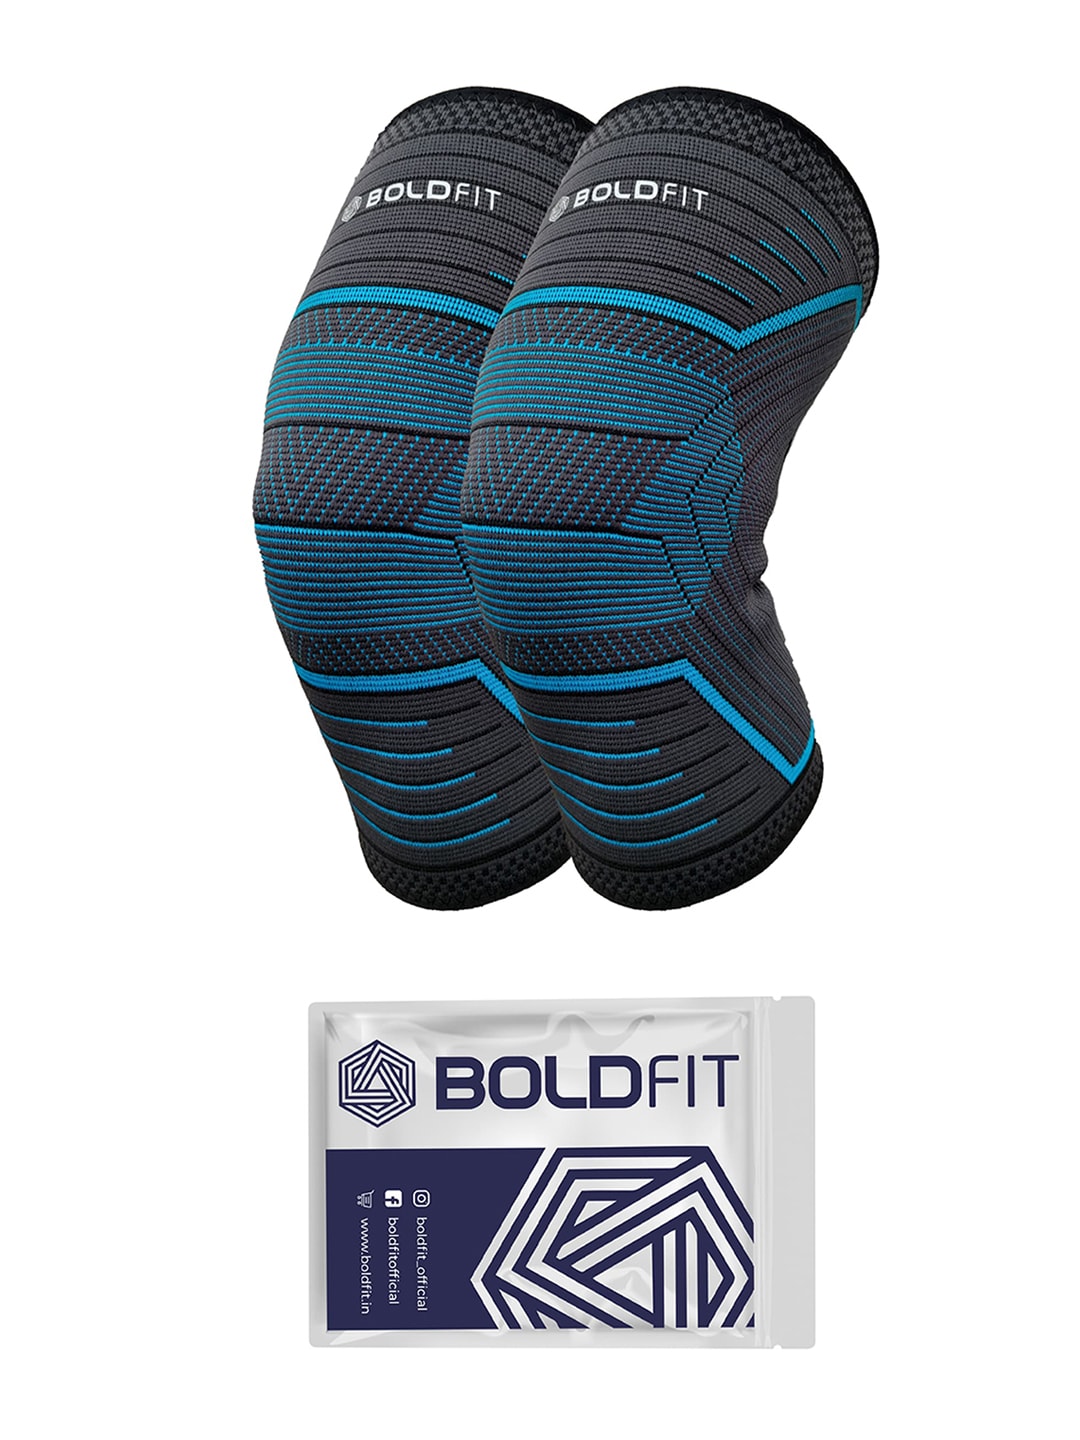 BOLDFIT Black & Blue Solid Knee Support Cap Price in India